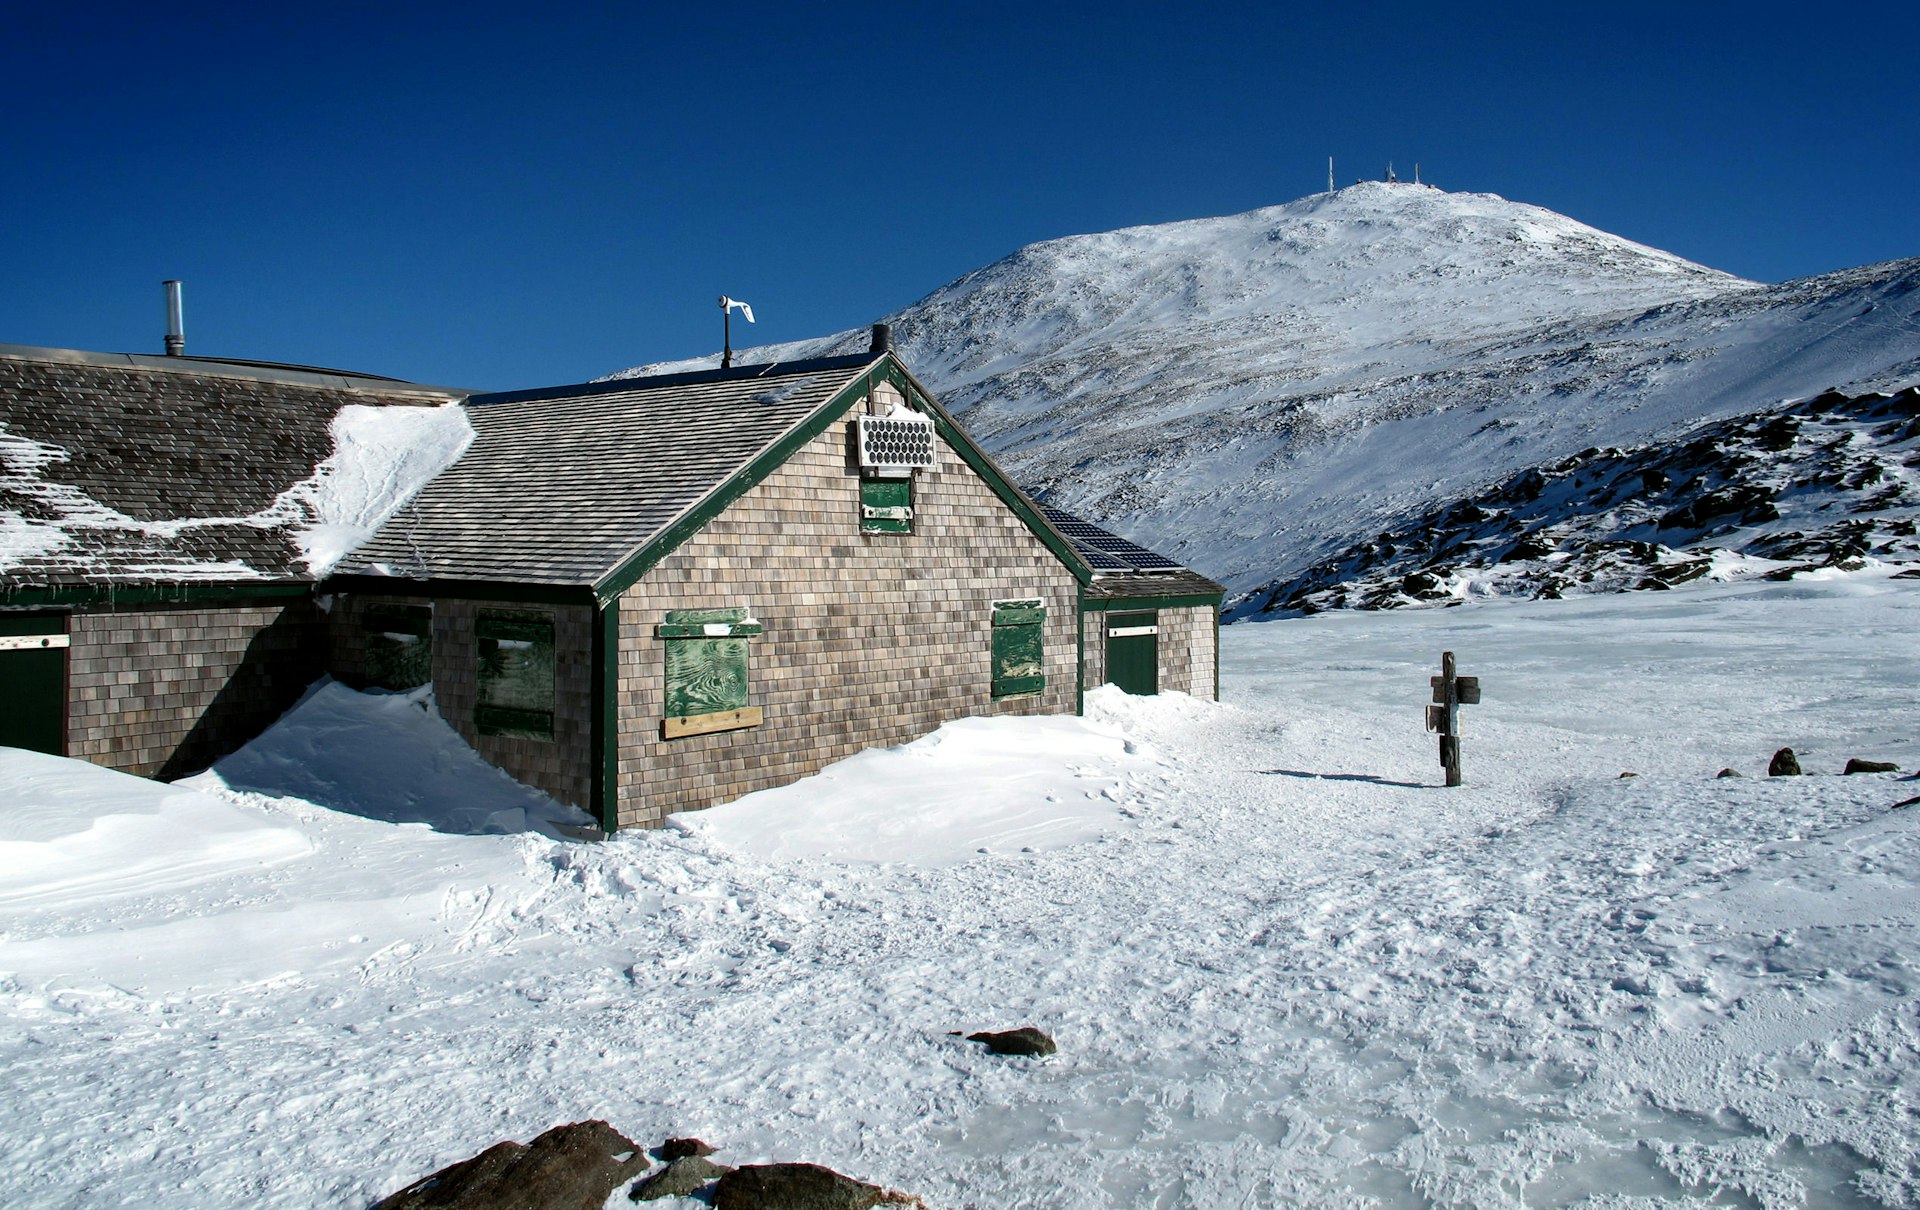 Mt Washington and AMC's Lakes of the Clouds Hut